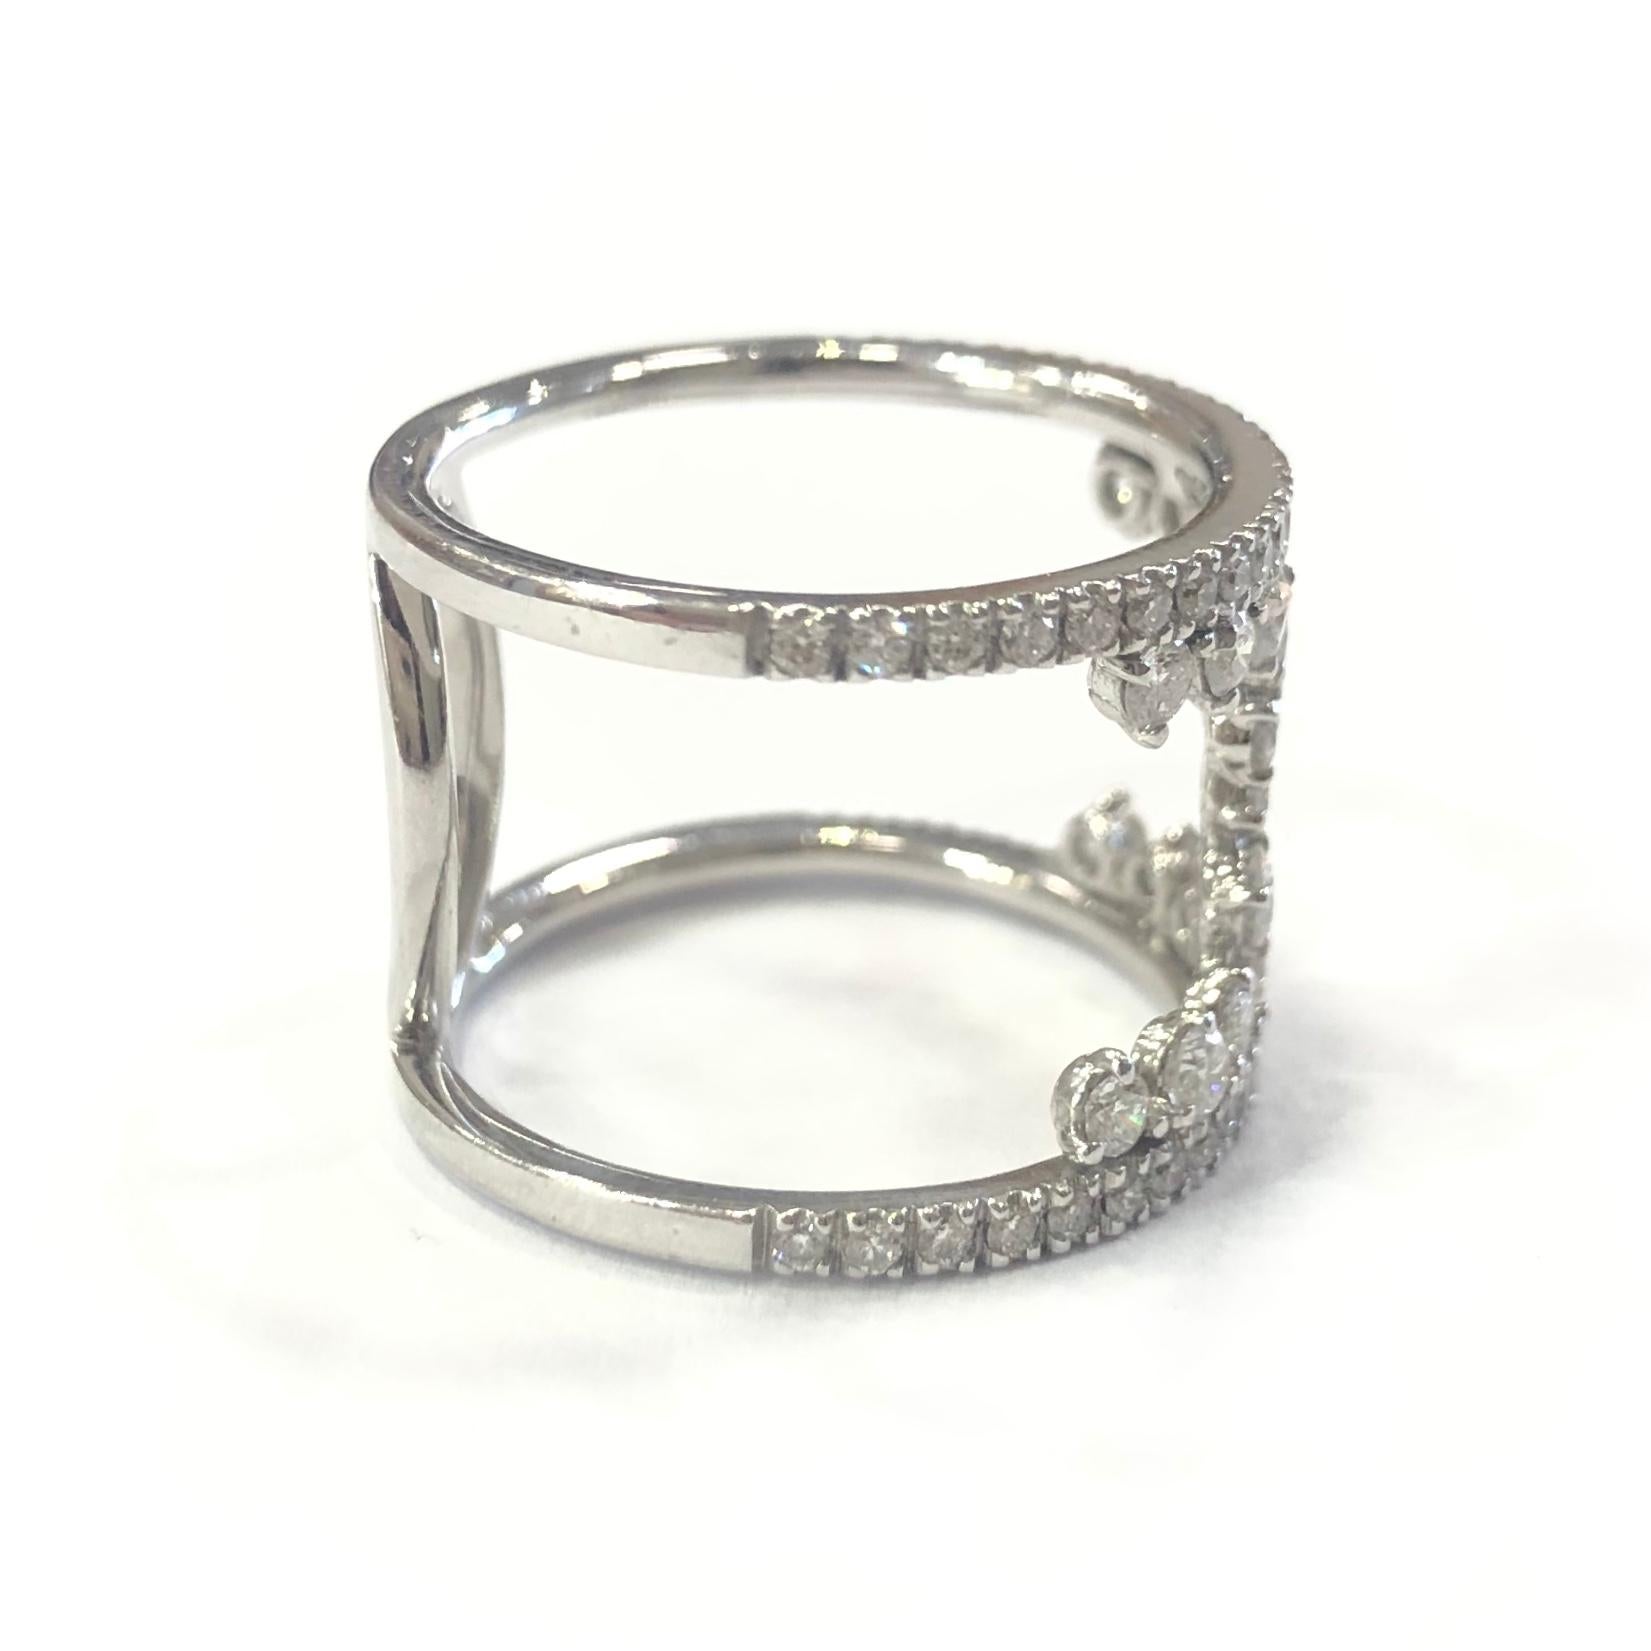 18ct White Gold Handmade Diamond Scatter Band Ring. Set with two half bands of round brilliant cut diamonds, with 19 round brilliant cut diamonds joining the two bands.

Approximate total Diamond weight : 2.00ct
Total weight : 5.2g
Ring size : M